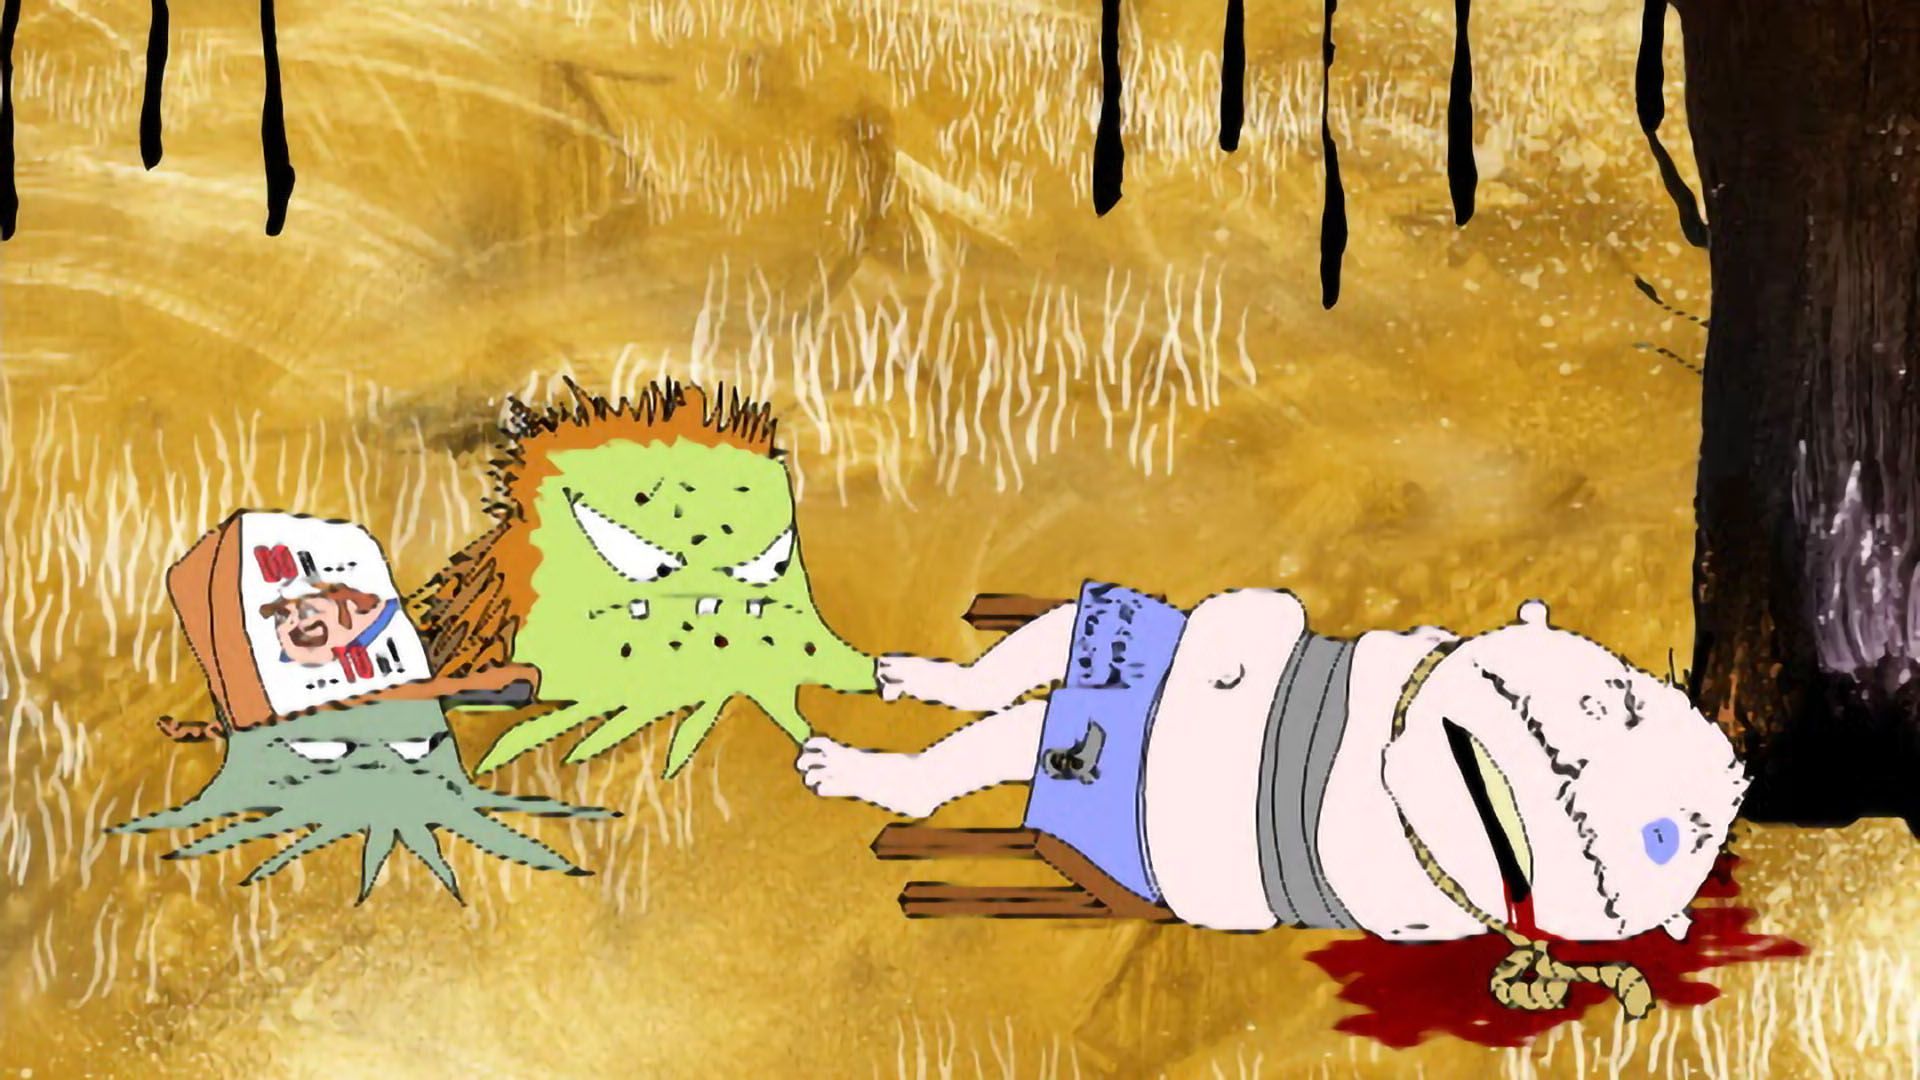 Squidbillies Porn - Watch Squidbillies Episodes and Clips for Free from Adult Swim